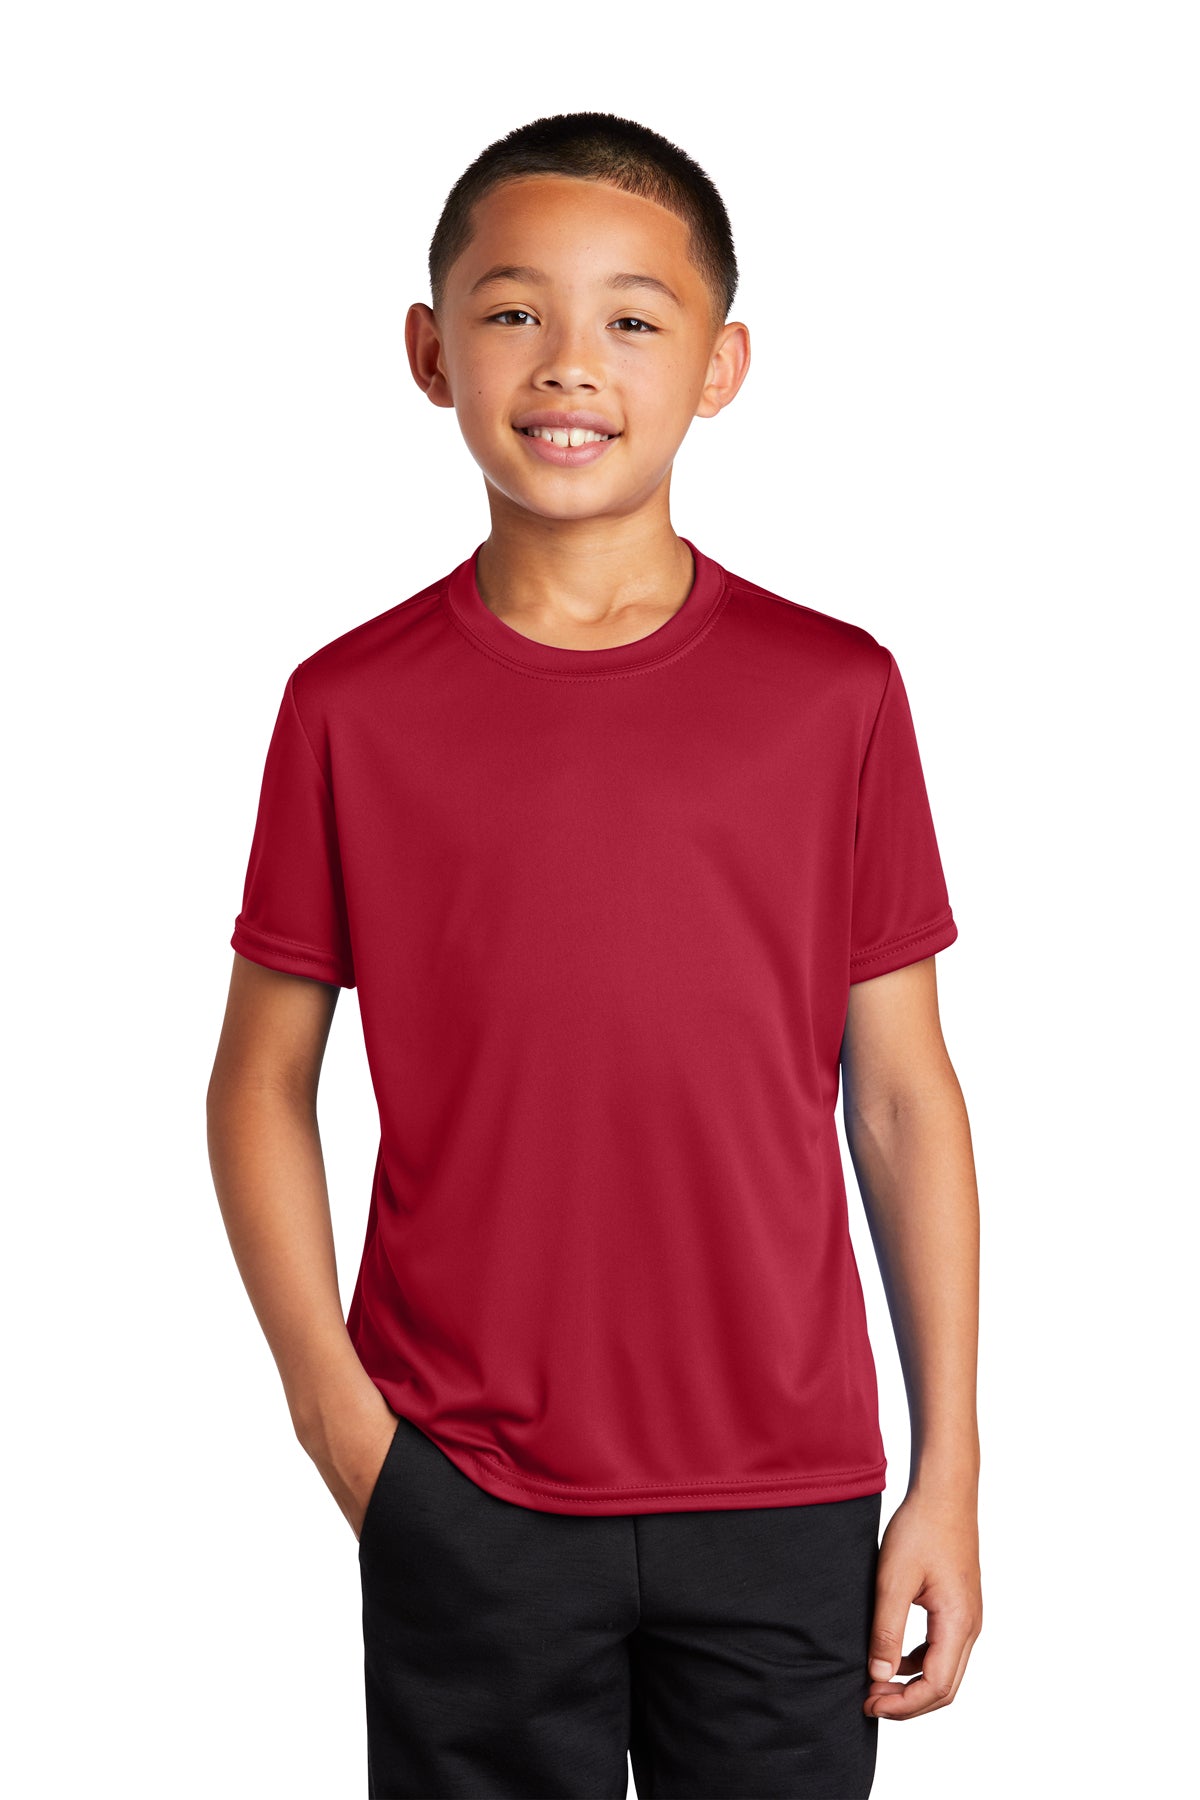 Port & Company Youth Performance Tee - S Red